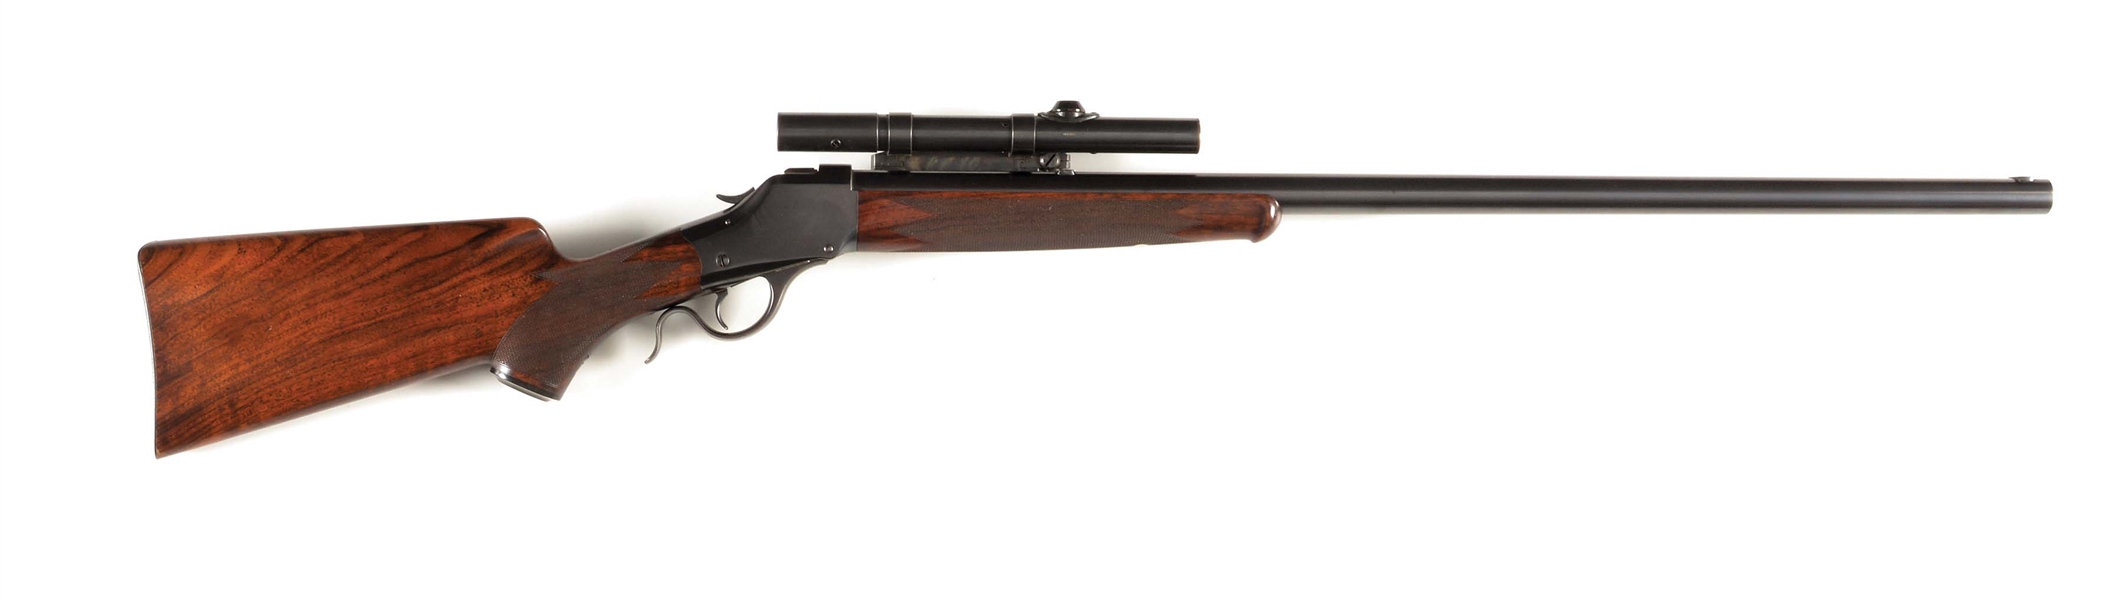 (C) VERY FINE CUSTOM WINCHESTER HI-WALL SINGLE SHOT OFF HAND RIFLE BY NIEDNER RIFLE CORP. WITH SCOPE.